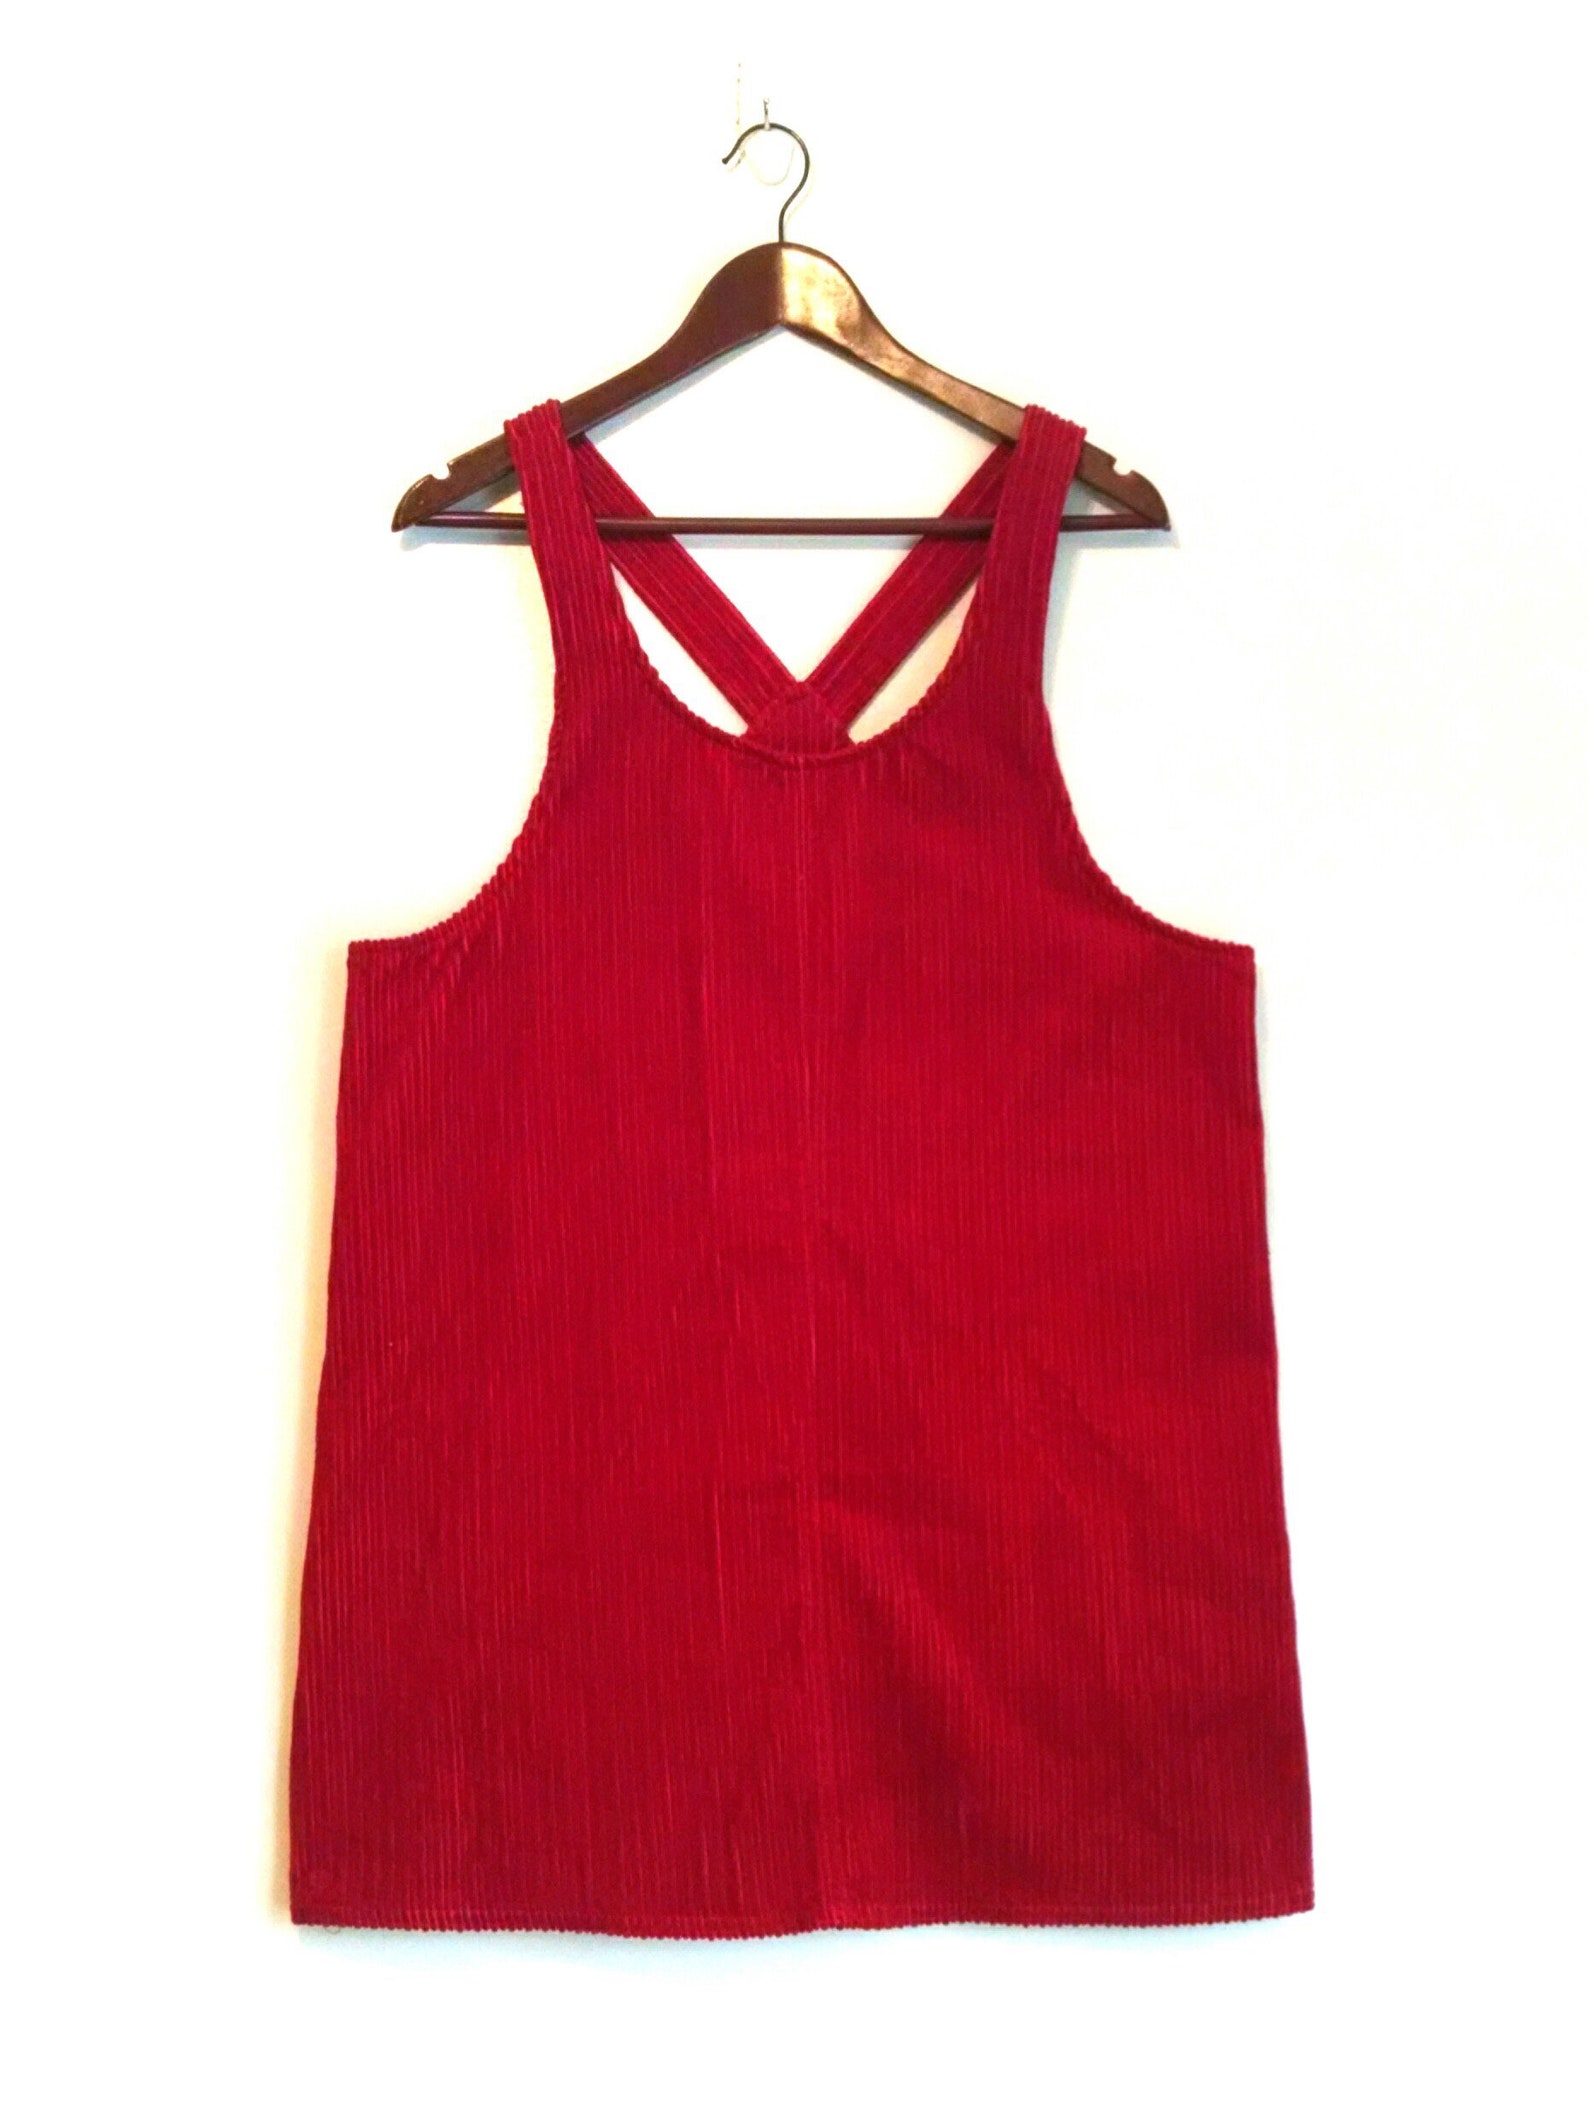 Vintage 1990s Red Corduroy Overall Dungarees Jumper Mini Dress - Etsy UK